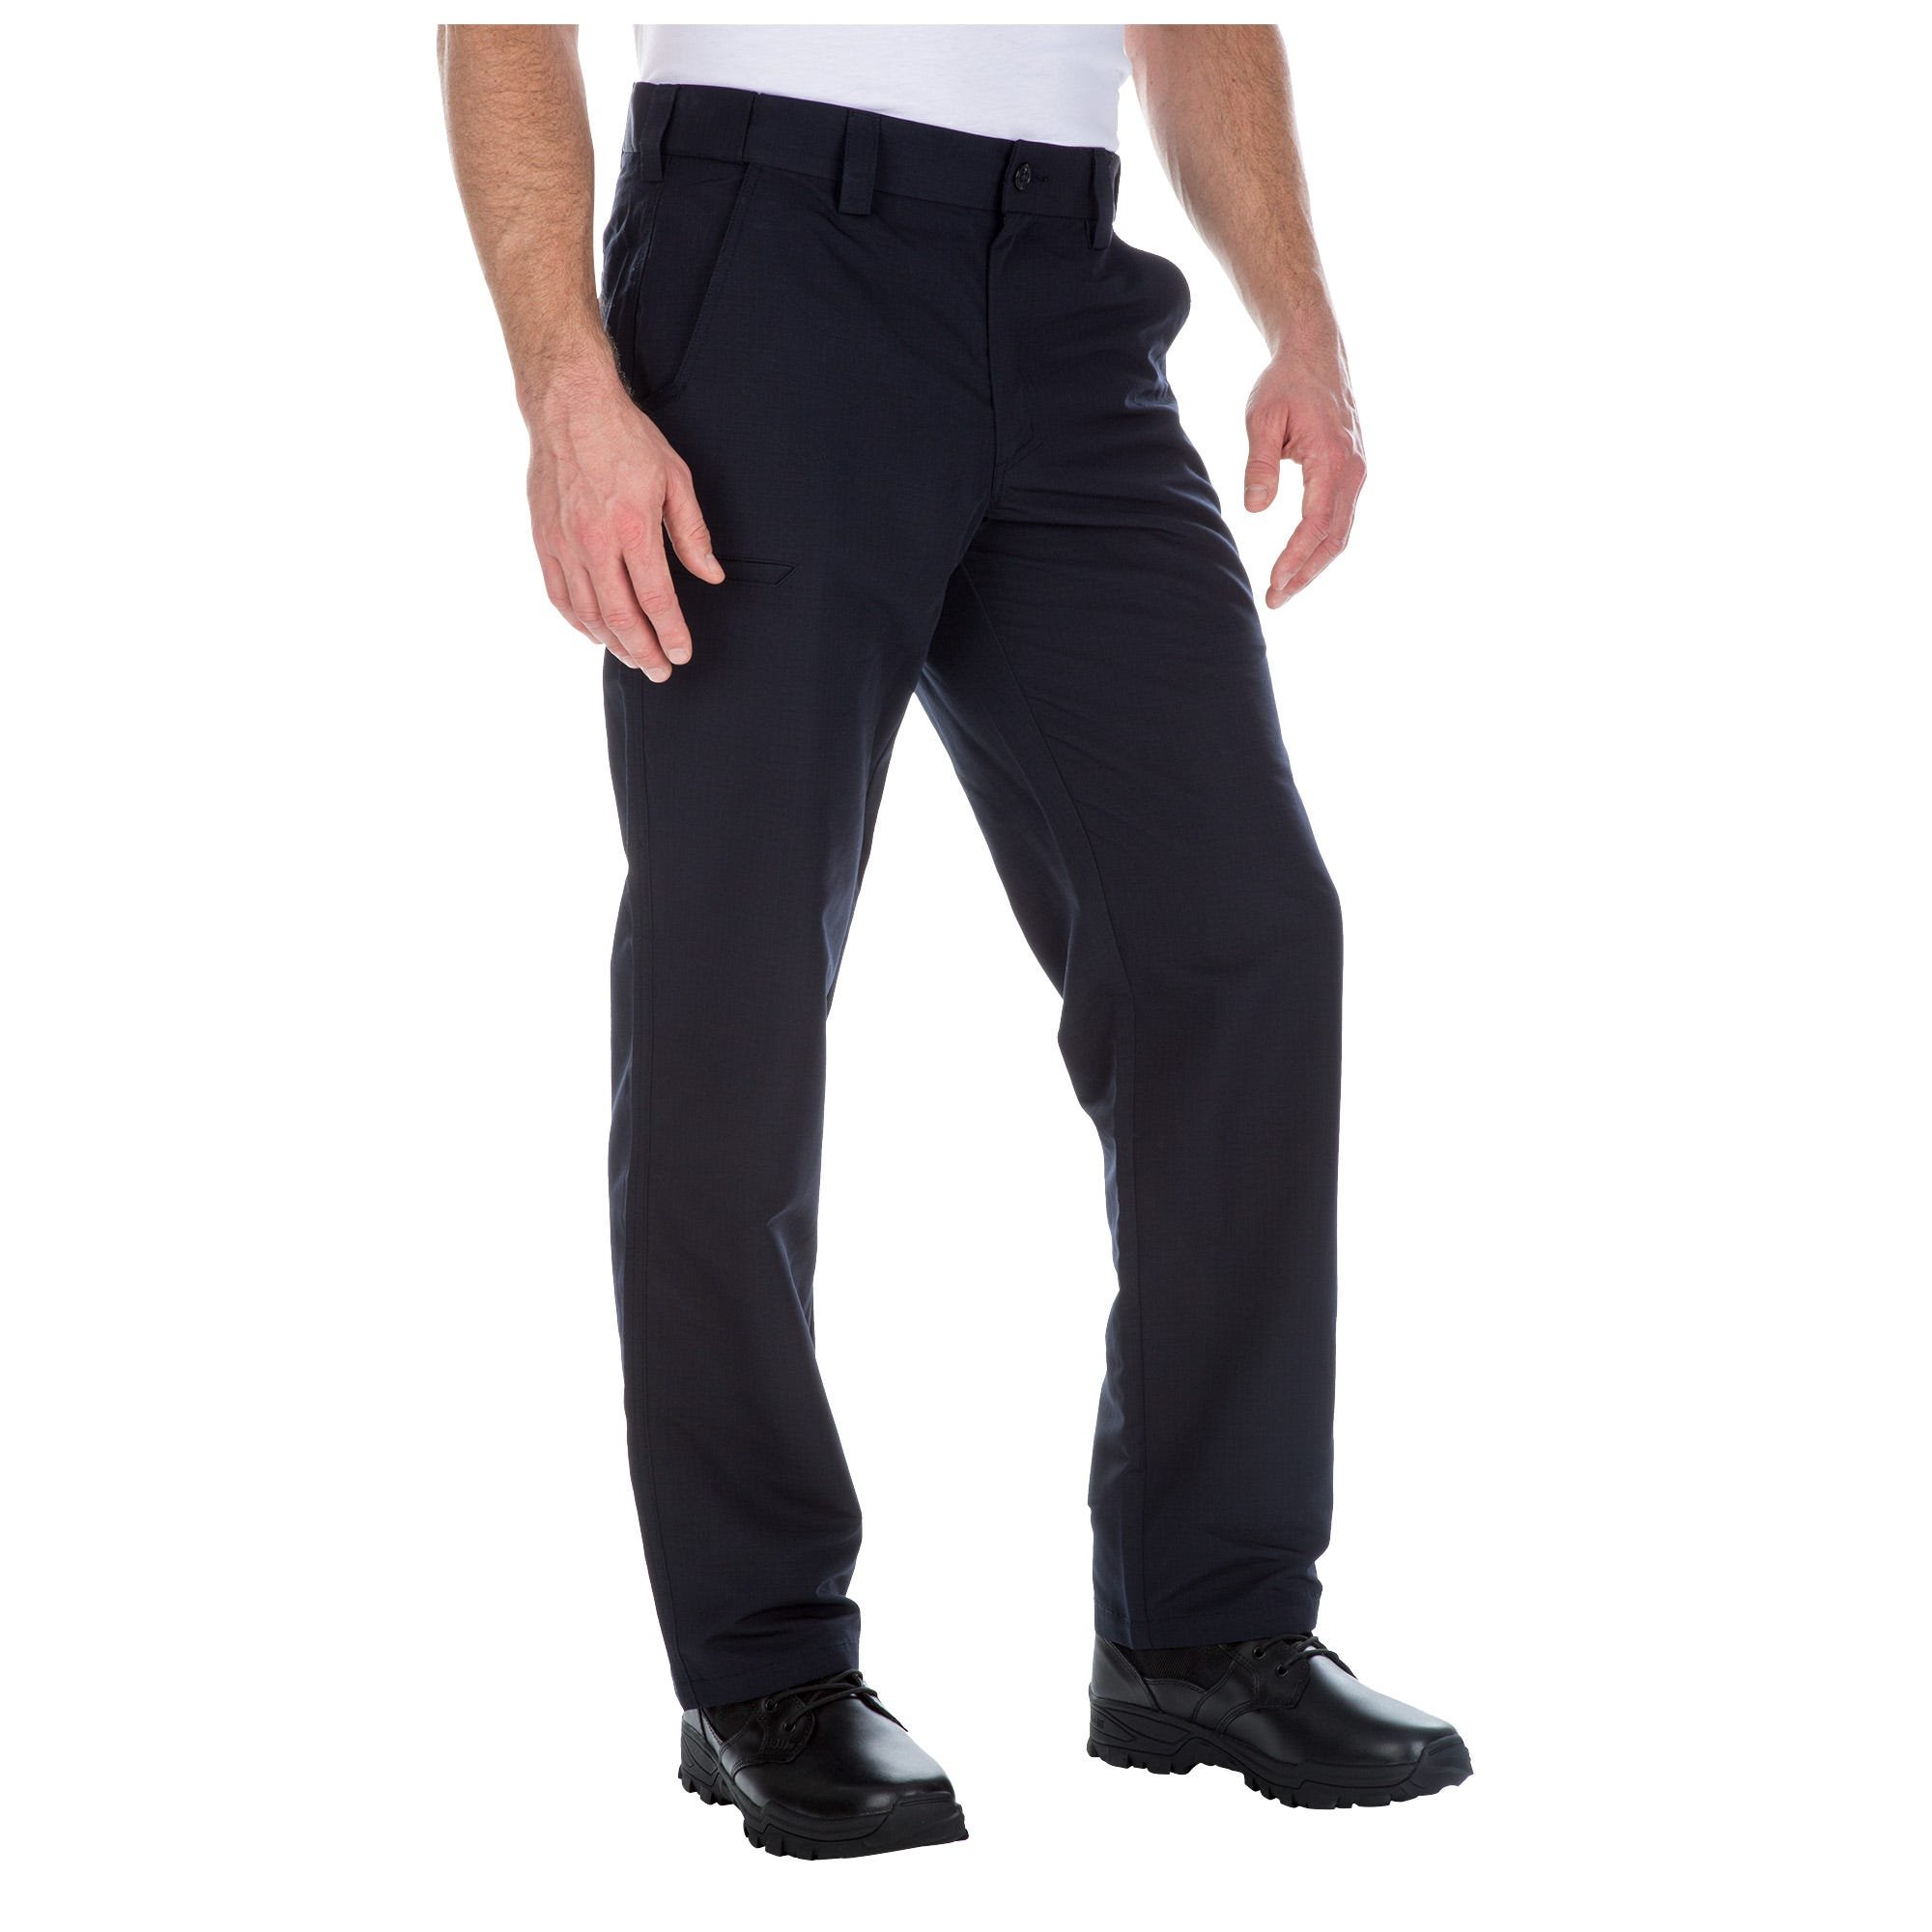 5.11 Tactical Men's Fast-Tac Urban Pants, 100% Polyester Fabric, Style ...